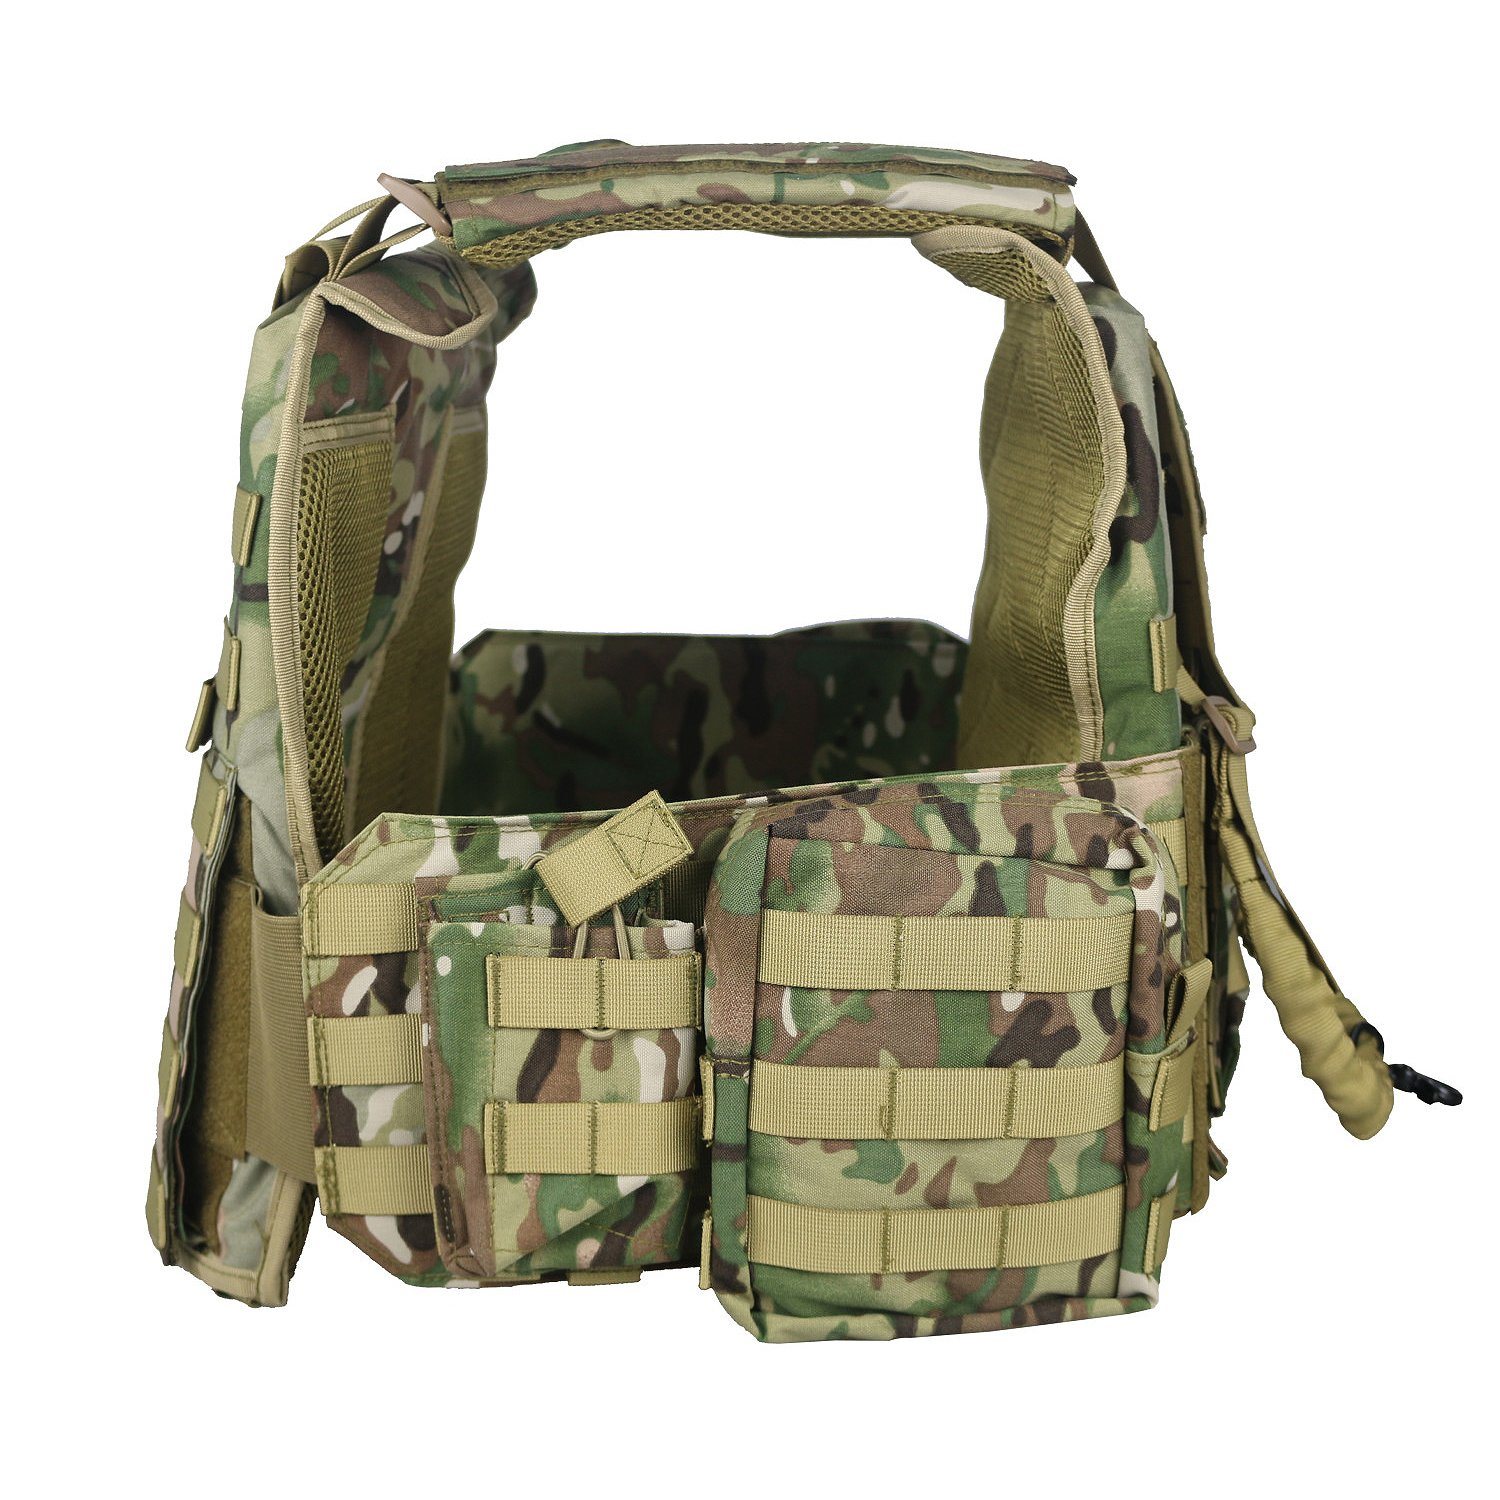 600d Upgrade Military Vest Tactical Plate Carrier